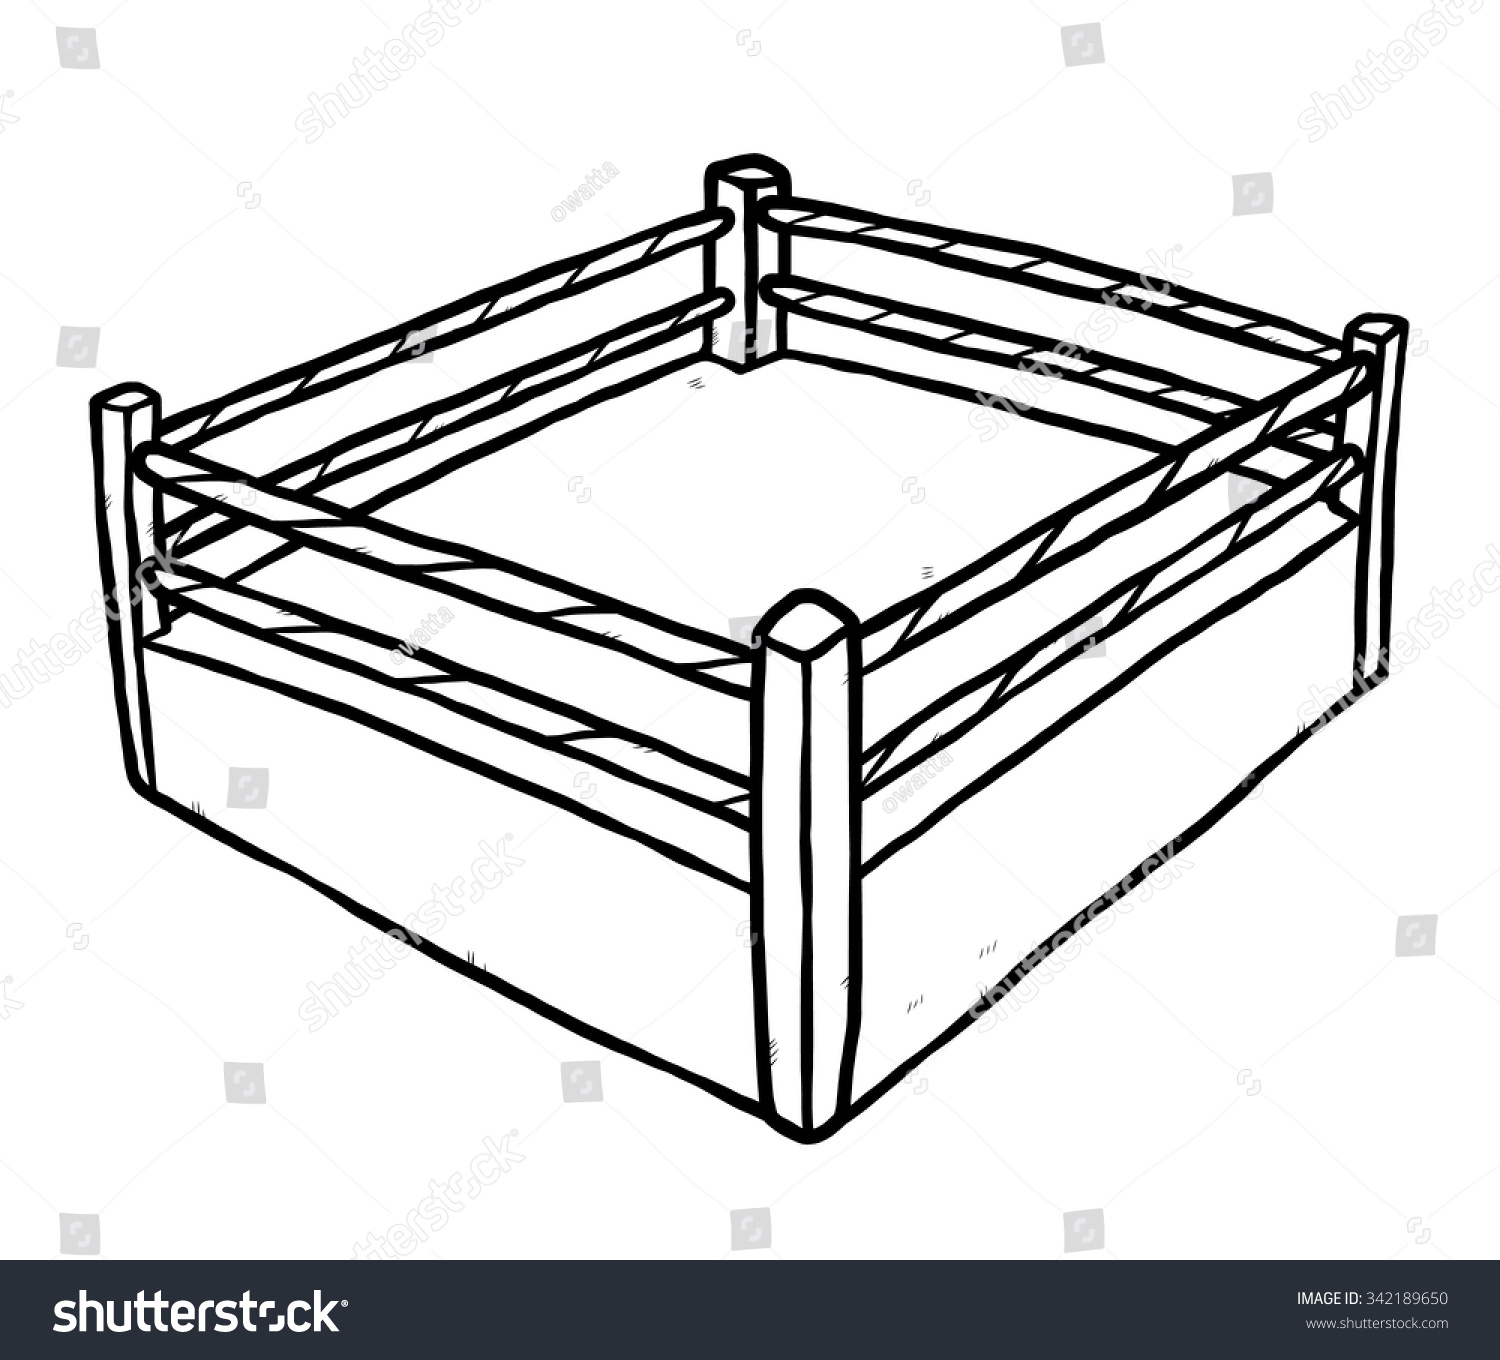 clipart boxing ring - photo #47